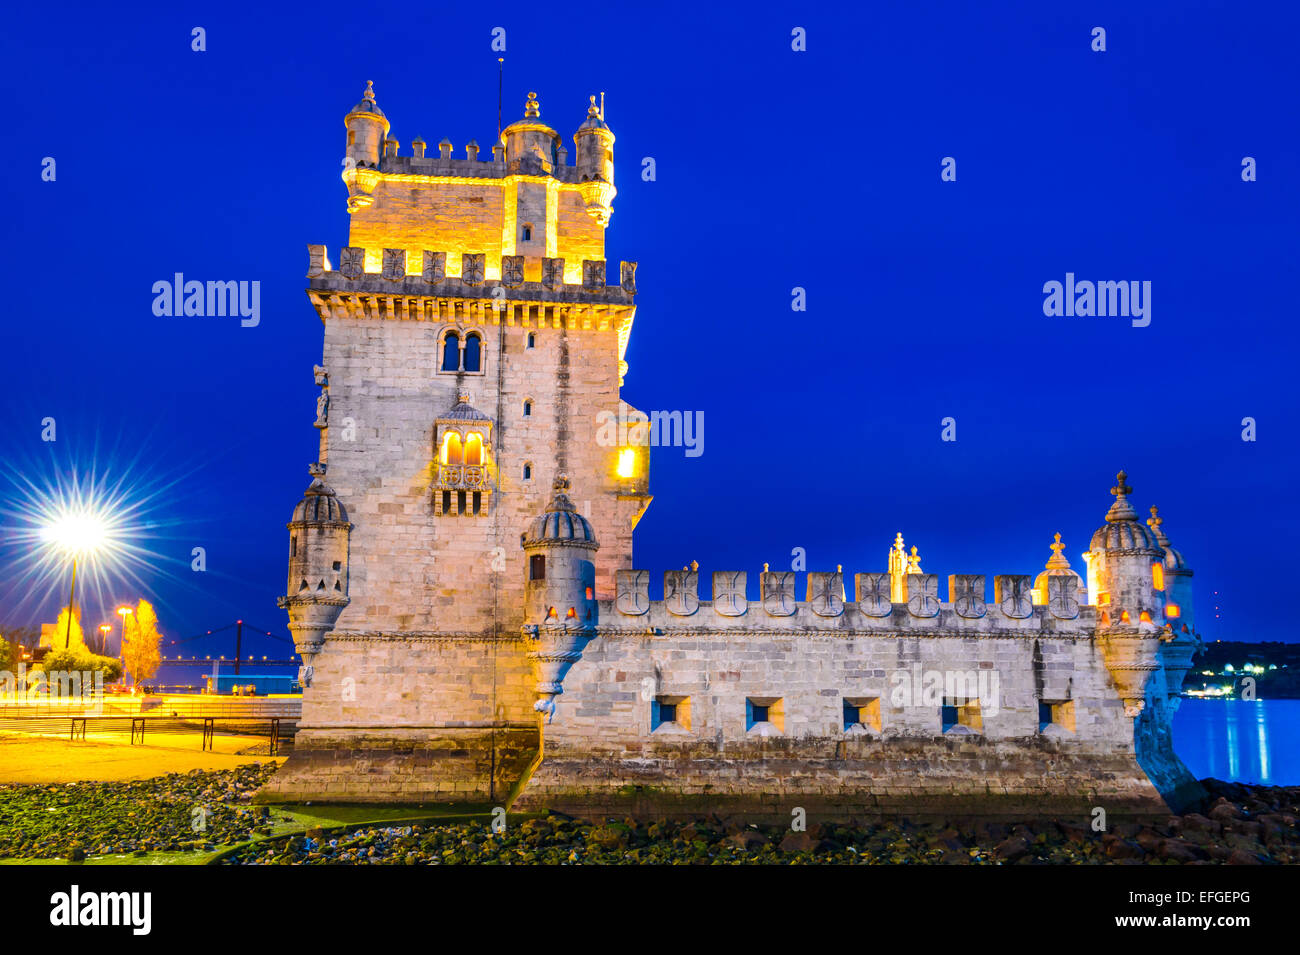 Lisbon, Portugal. Belem Tower (Torre de Belem) is a fortified tower located at the mouth of the Tagus River. Stock Photo